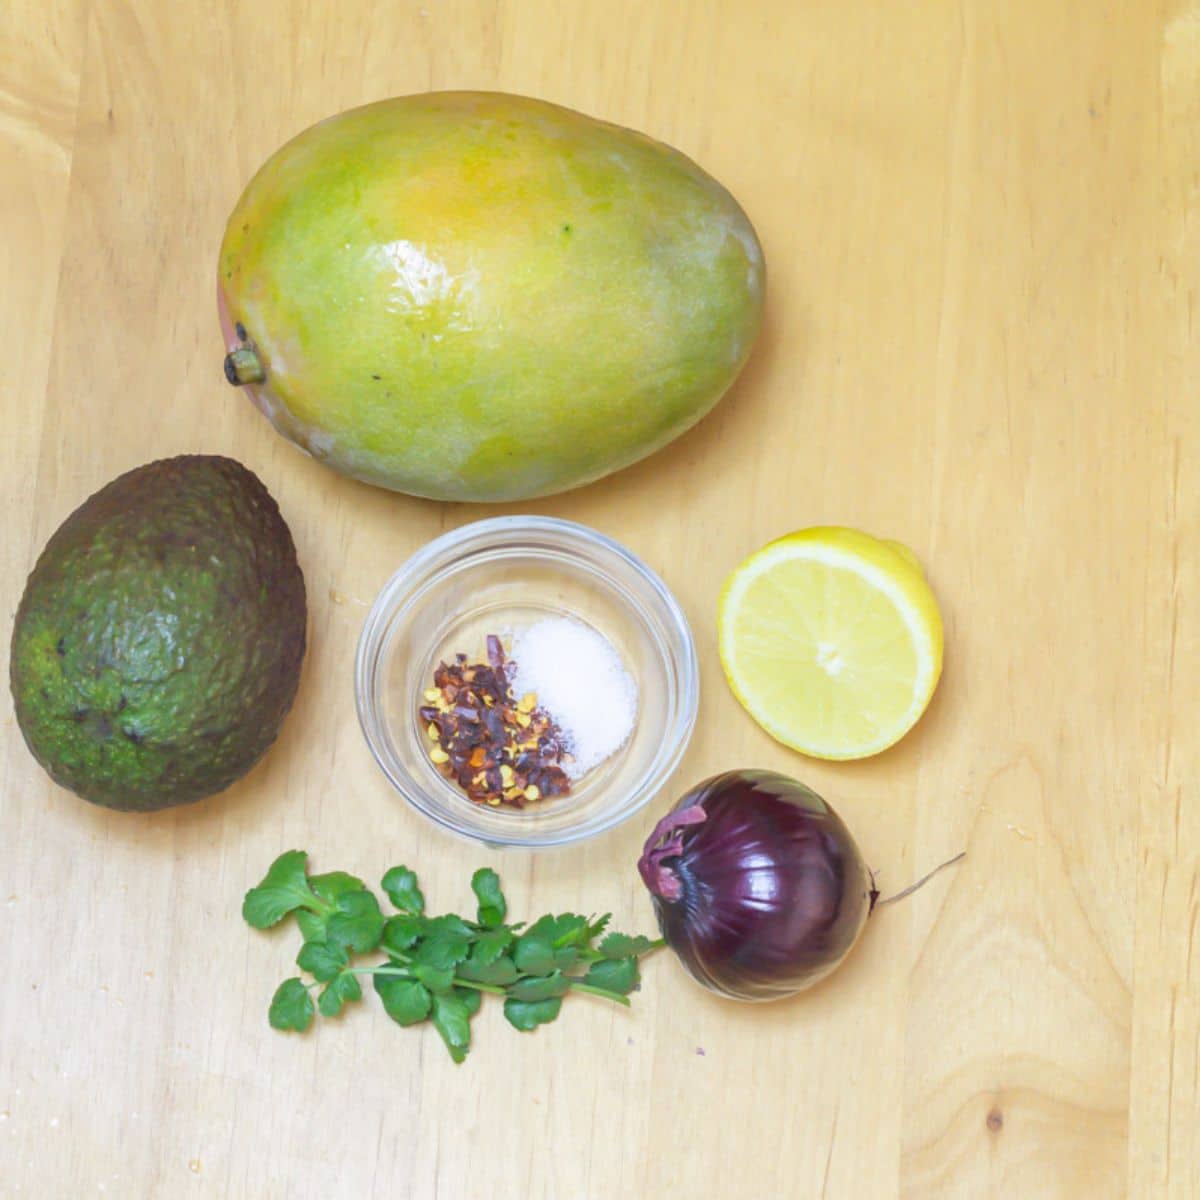 mango, avocado, coriander, red onion, lemon and seasoning placed on a wooden table.